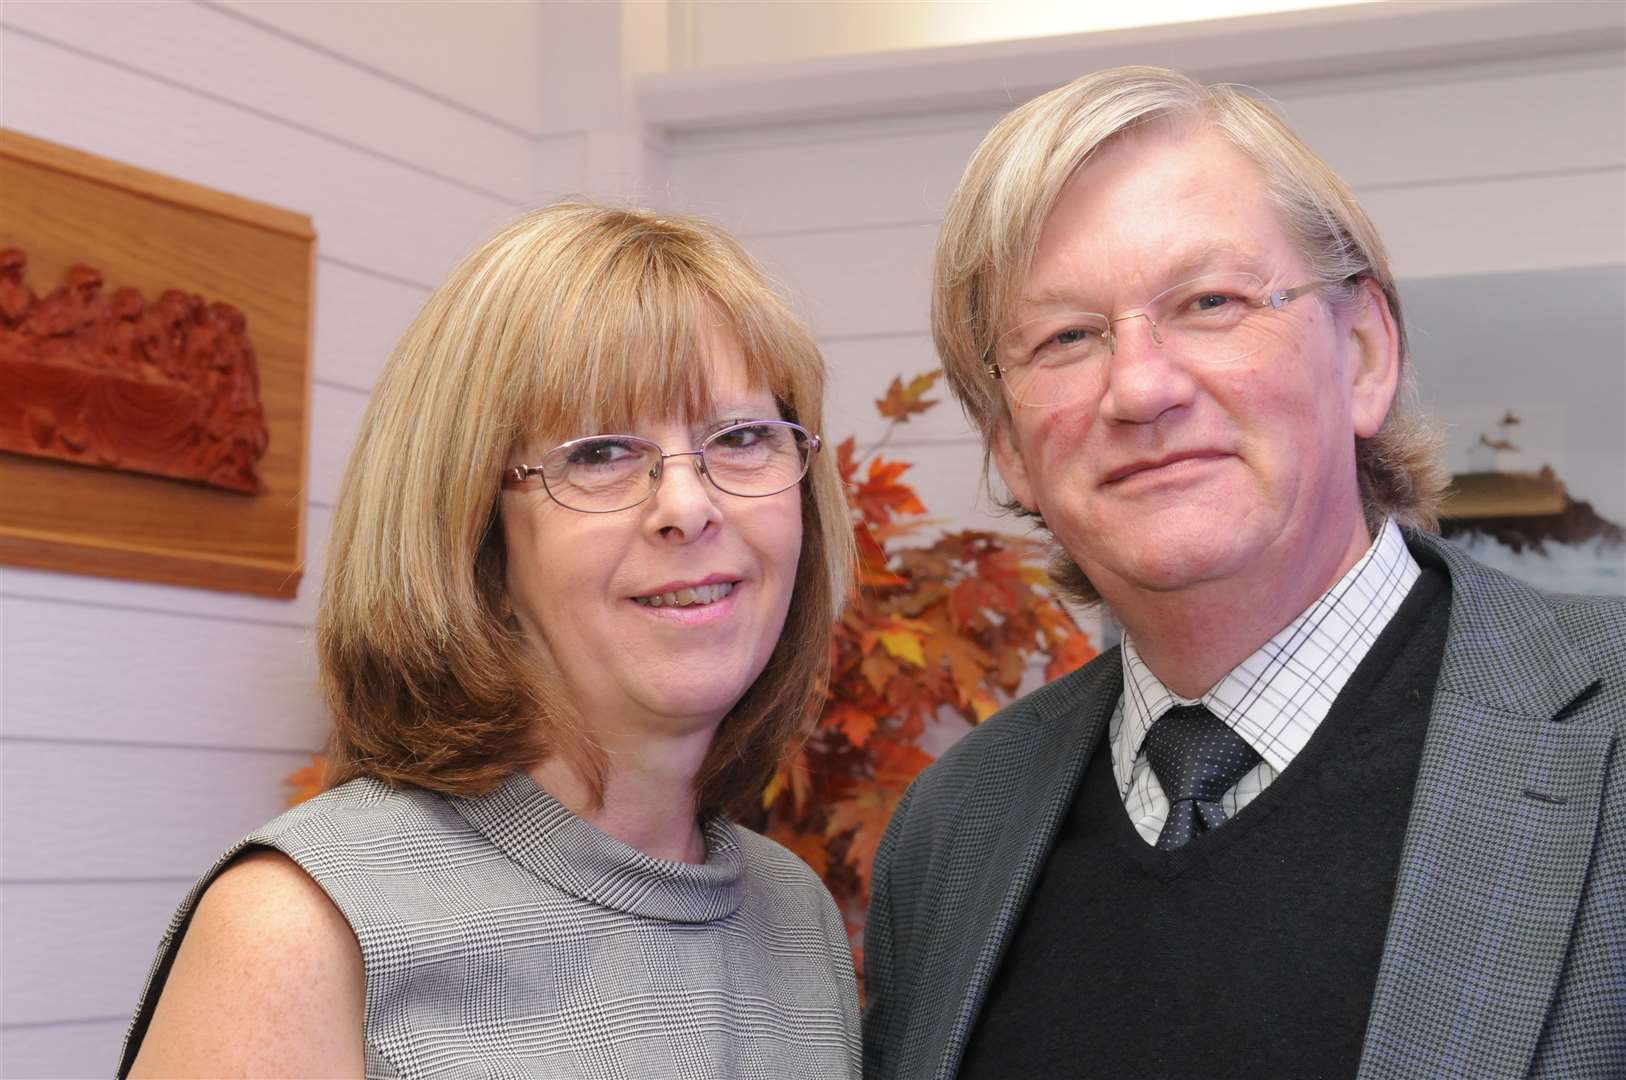 Terry Allen, pictured with his wife of 41 years, Lynn